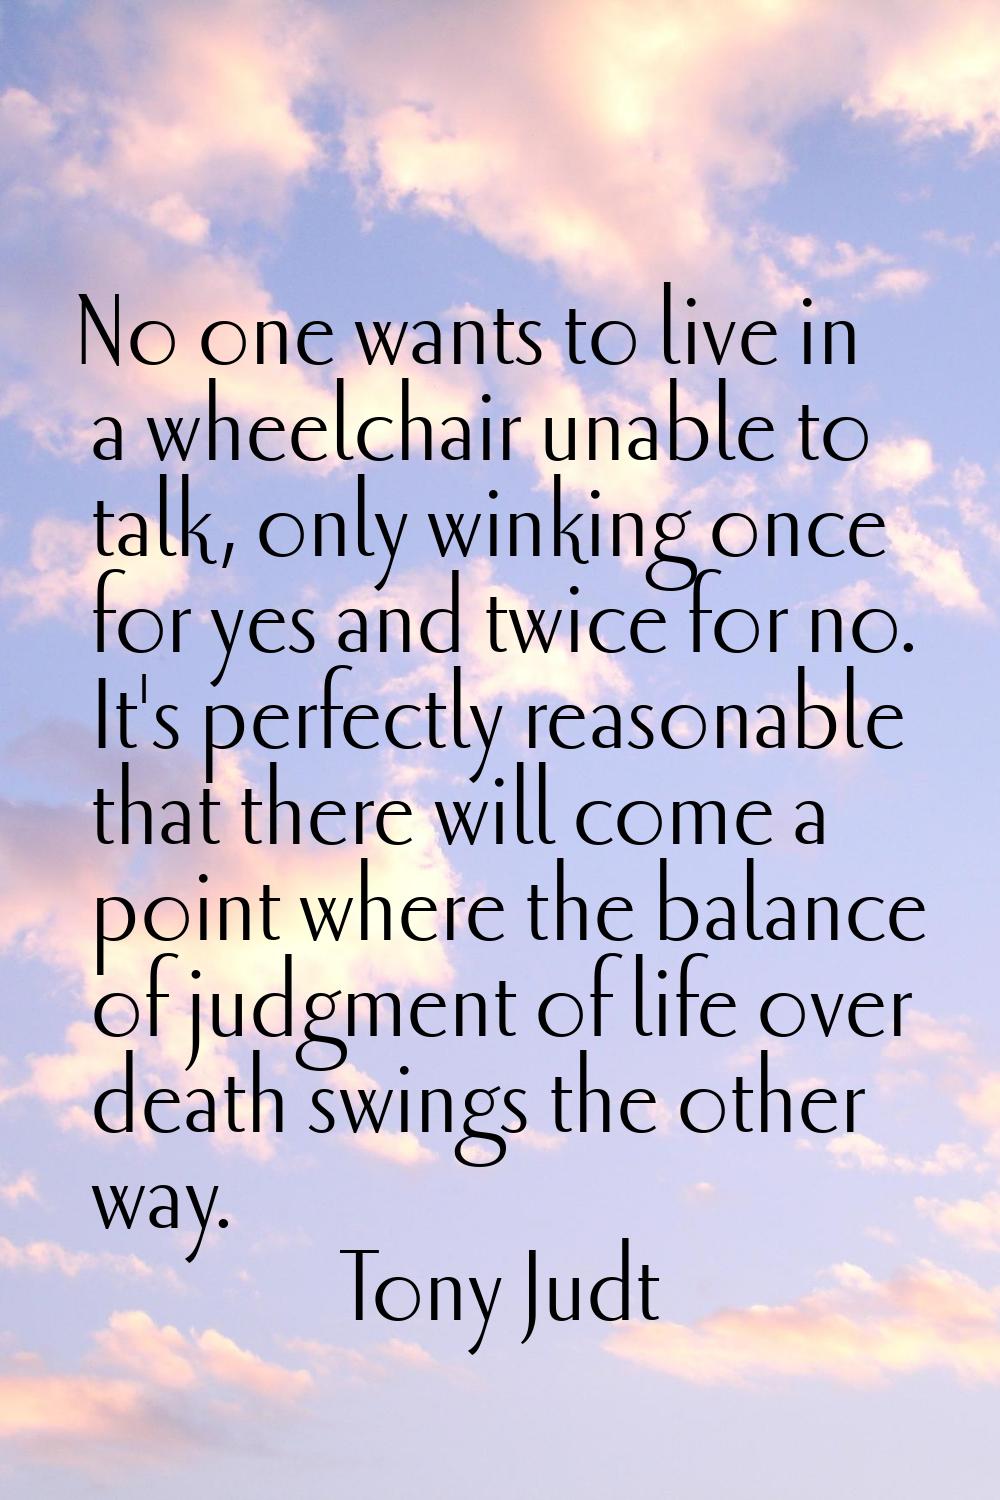 No one wants to live in a wheelchair unable to talk, only winking once for yes and twice for no. It